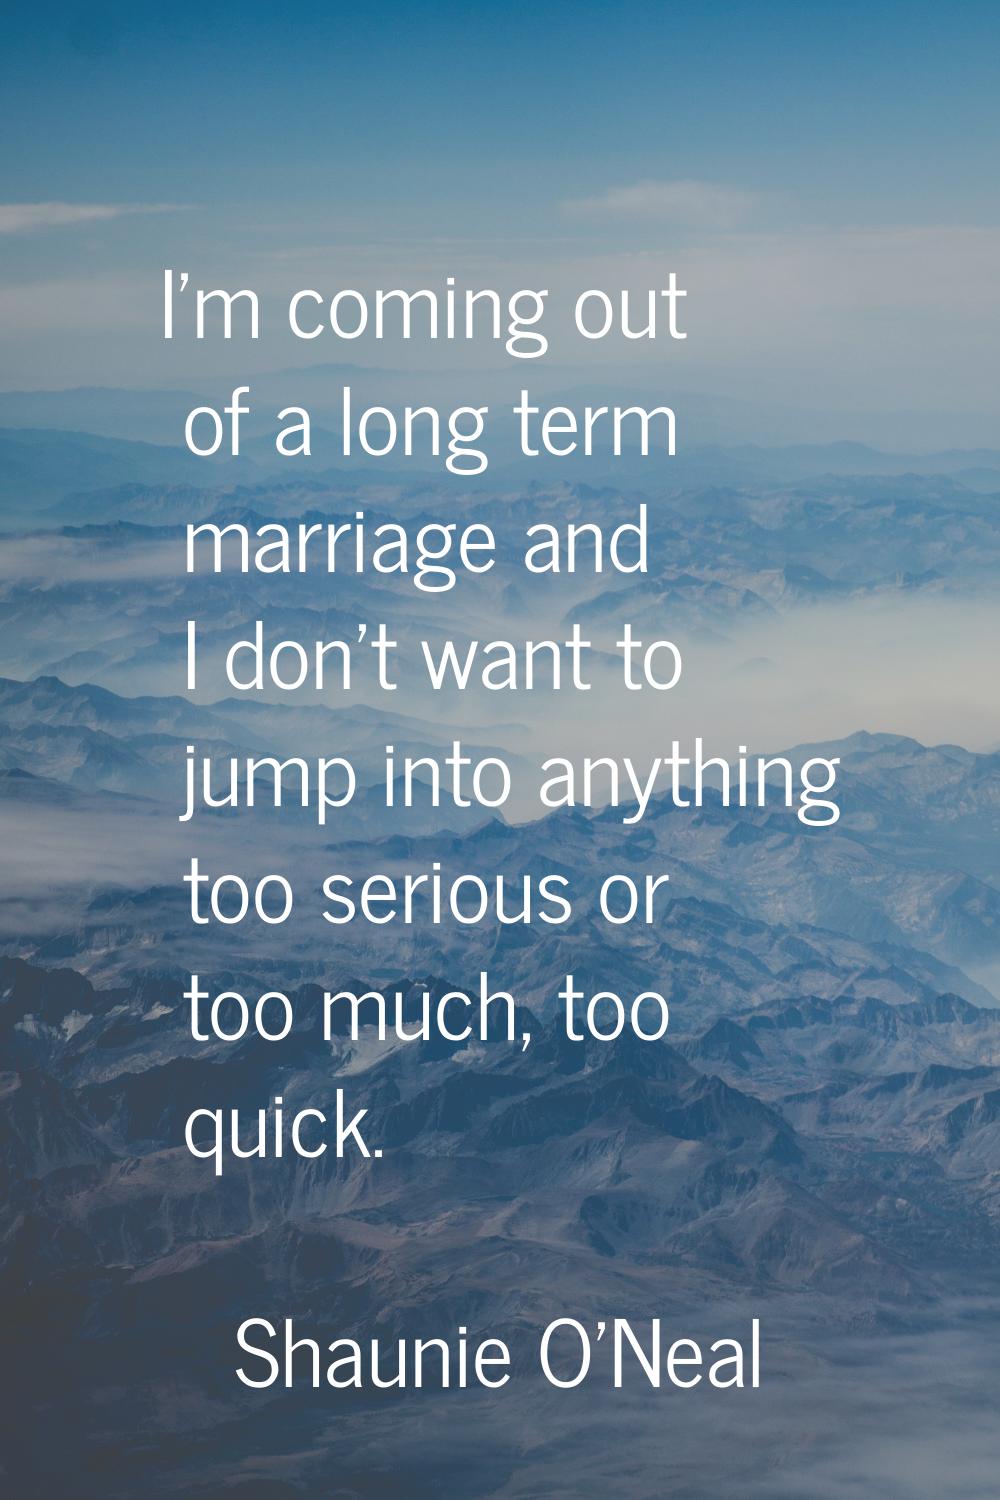 I'm coming out of a long term marriage and I don't want to jump into anything too serious or too mu